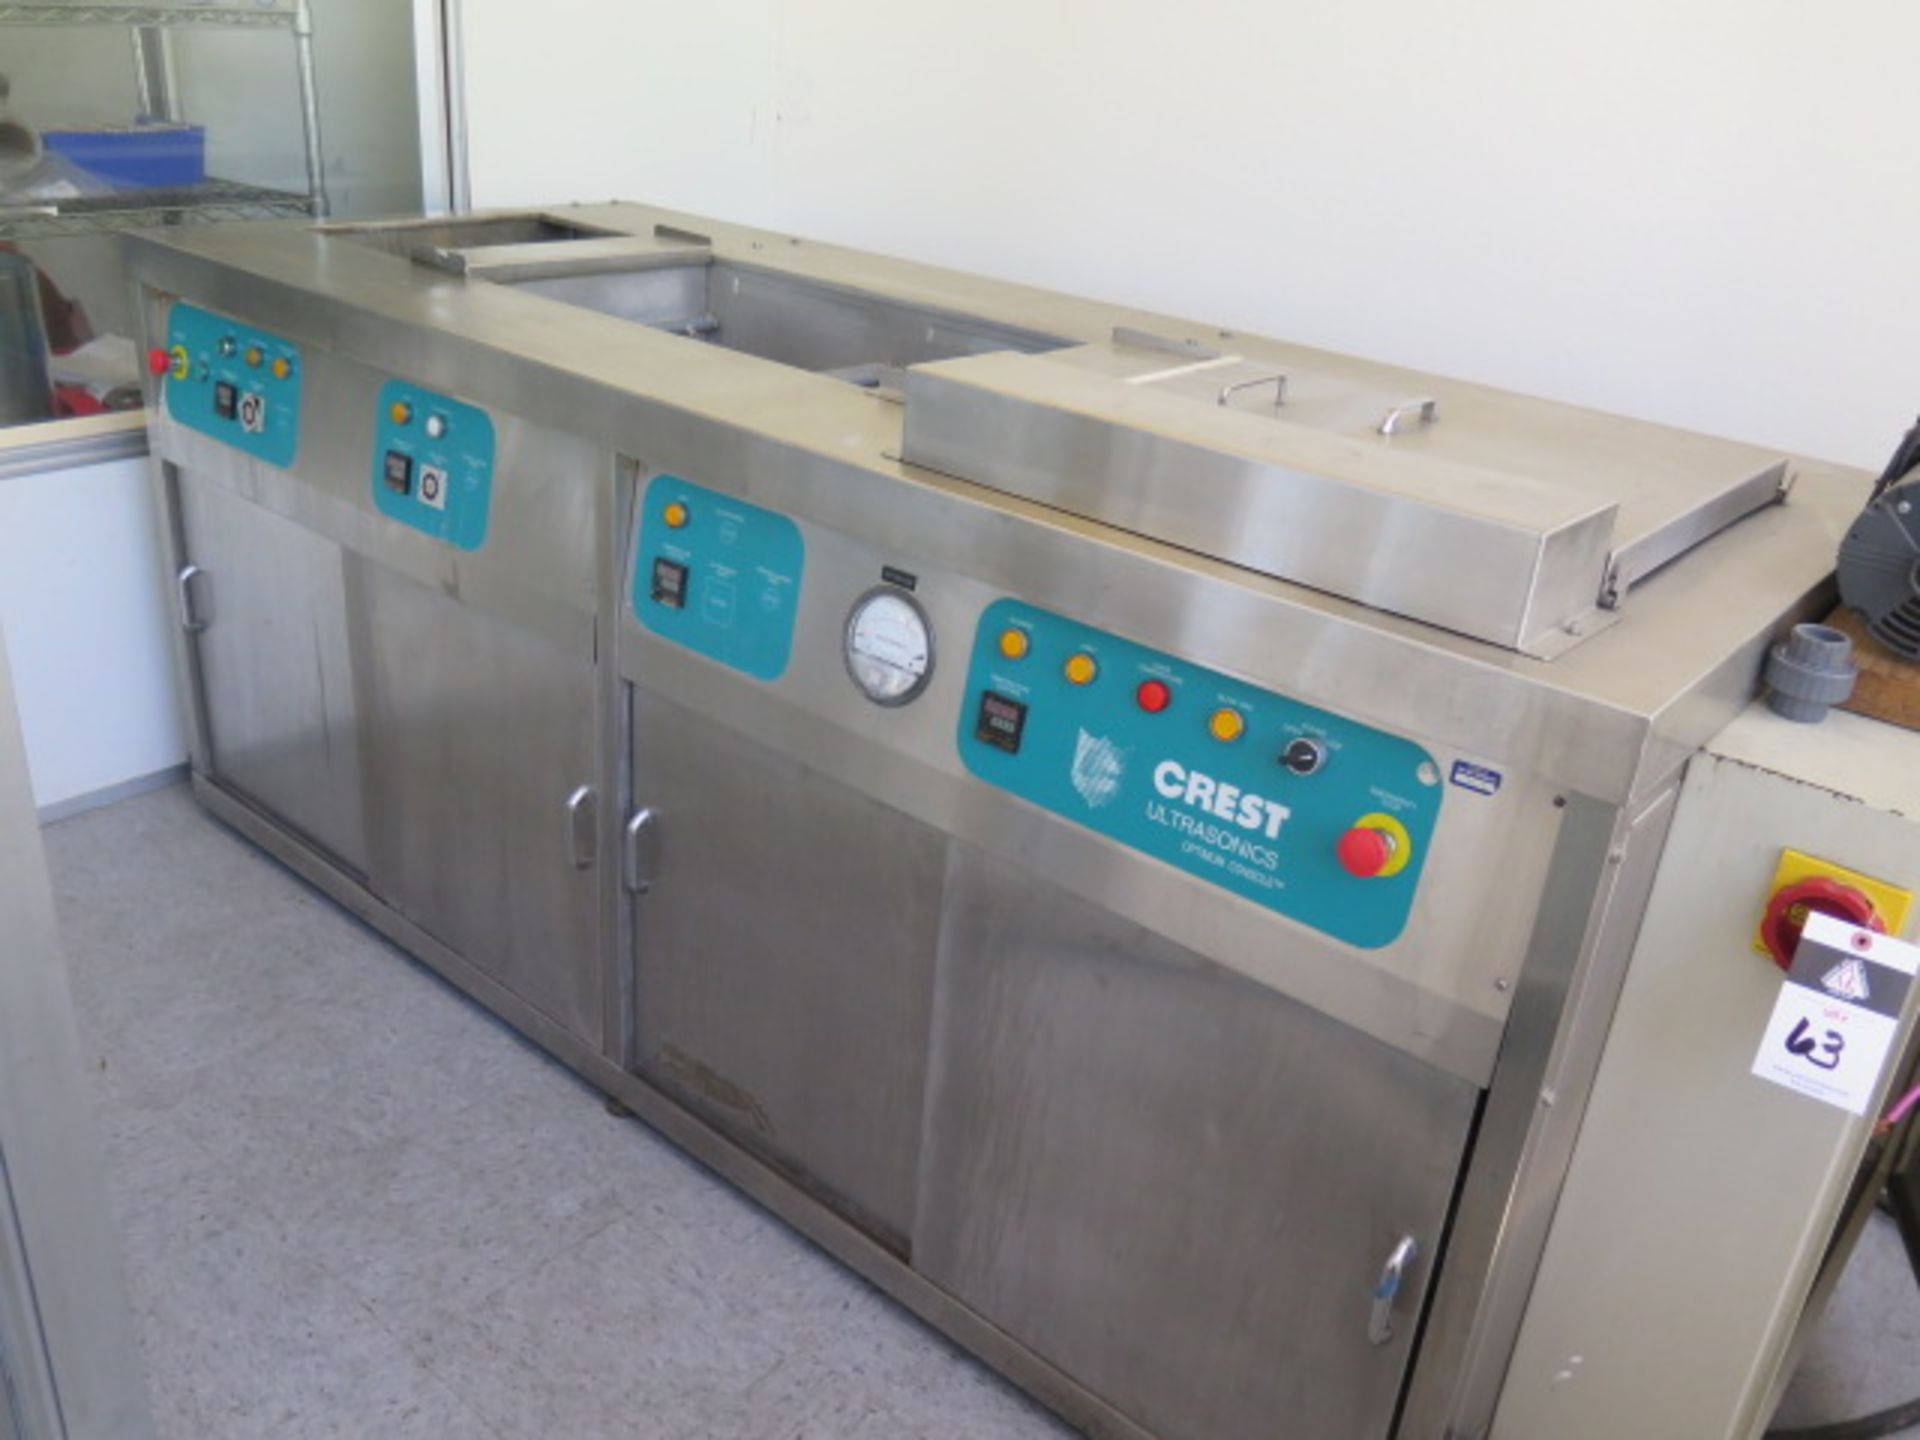 Crest Ultrasonic mdl. OC4-1218-HE 4-Station Ultrasonic Cleaning System s/n 0702-T-0484, SOLD AS IS